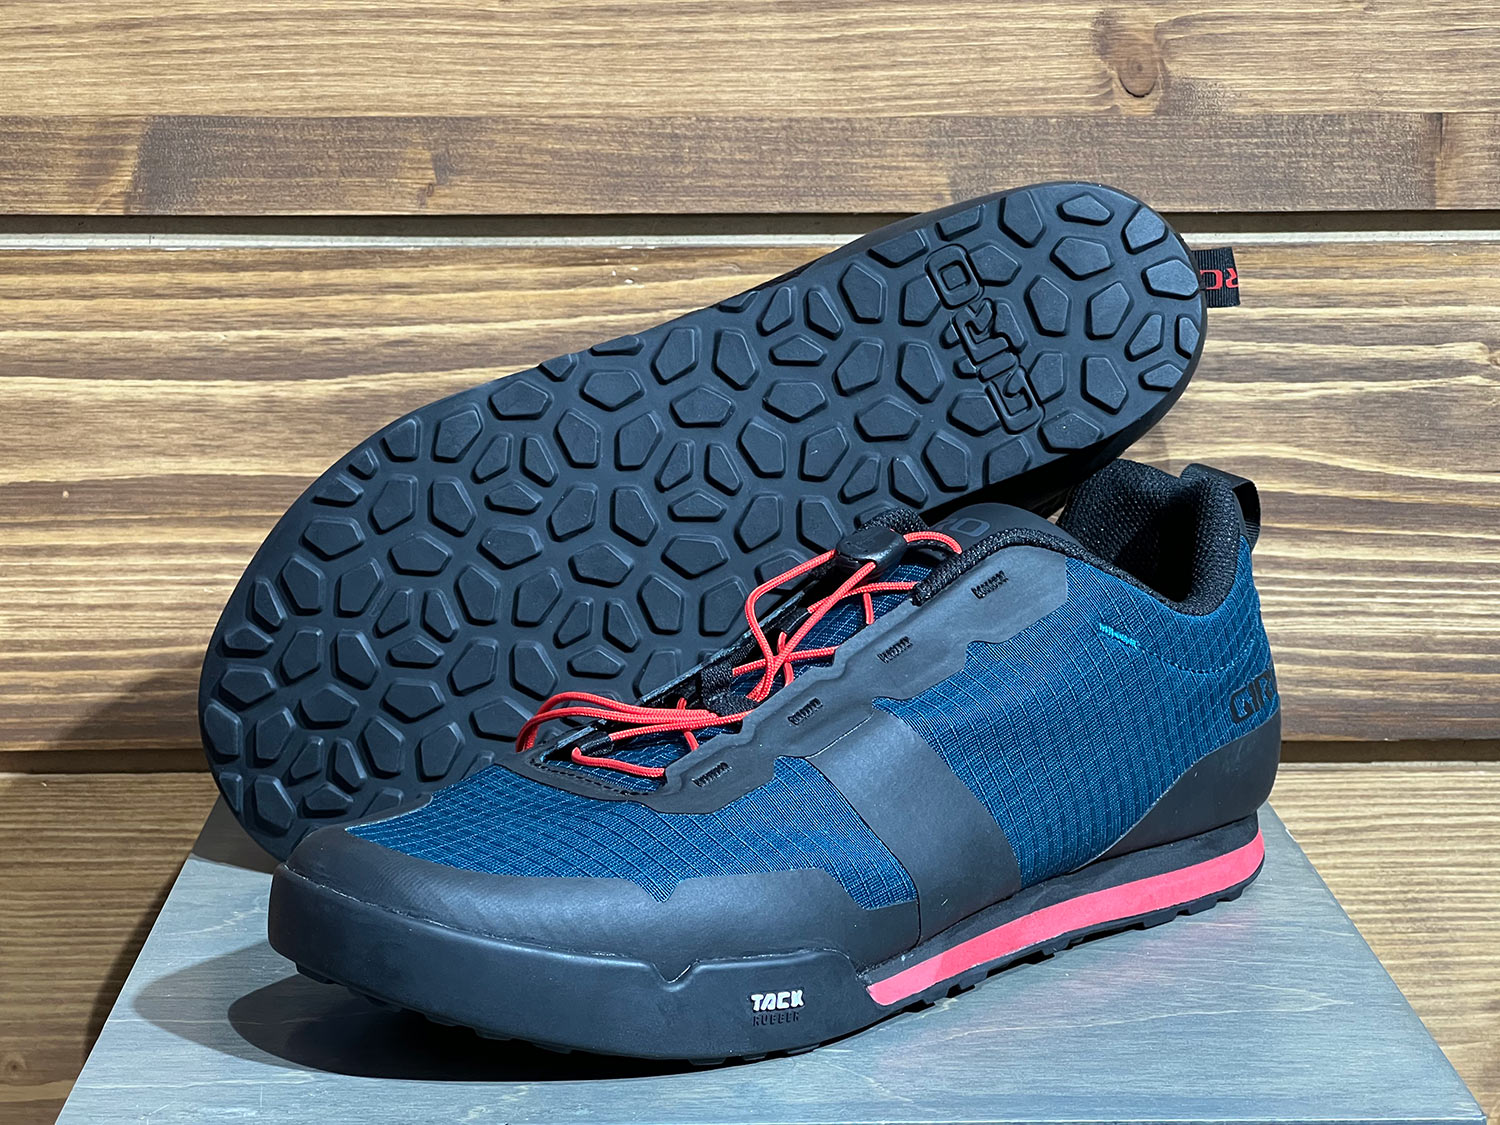 giro tracker fast lace flat pedal shoes are perfect for beginner mountain bikers and commuters